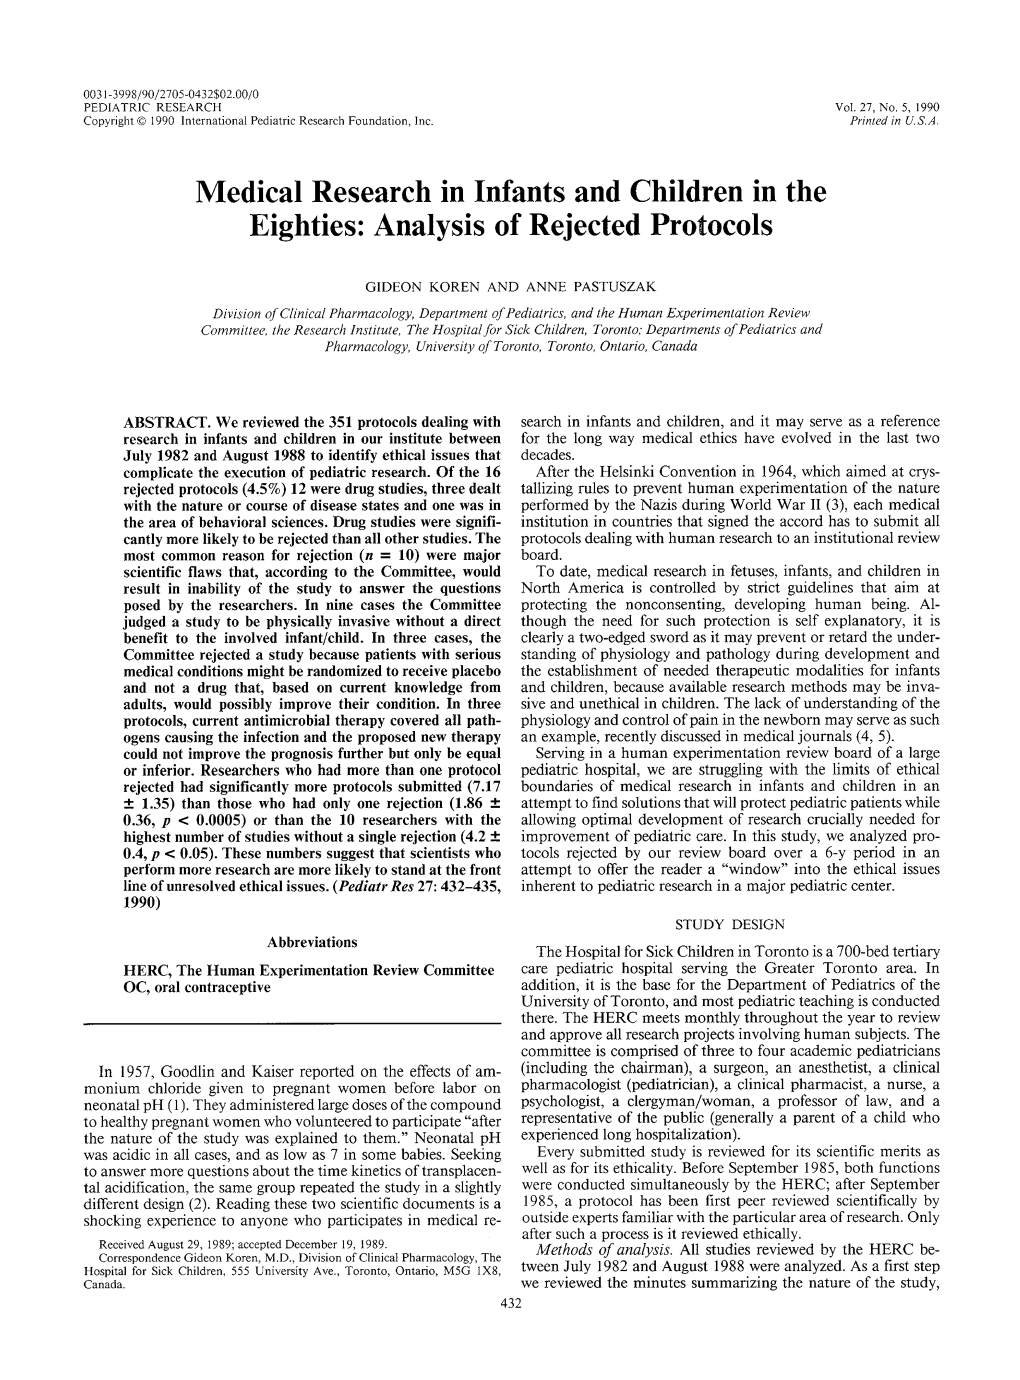 Medical Research in Infants and Children in the Eighties: Analysis of Rejected Protocols